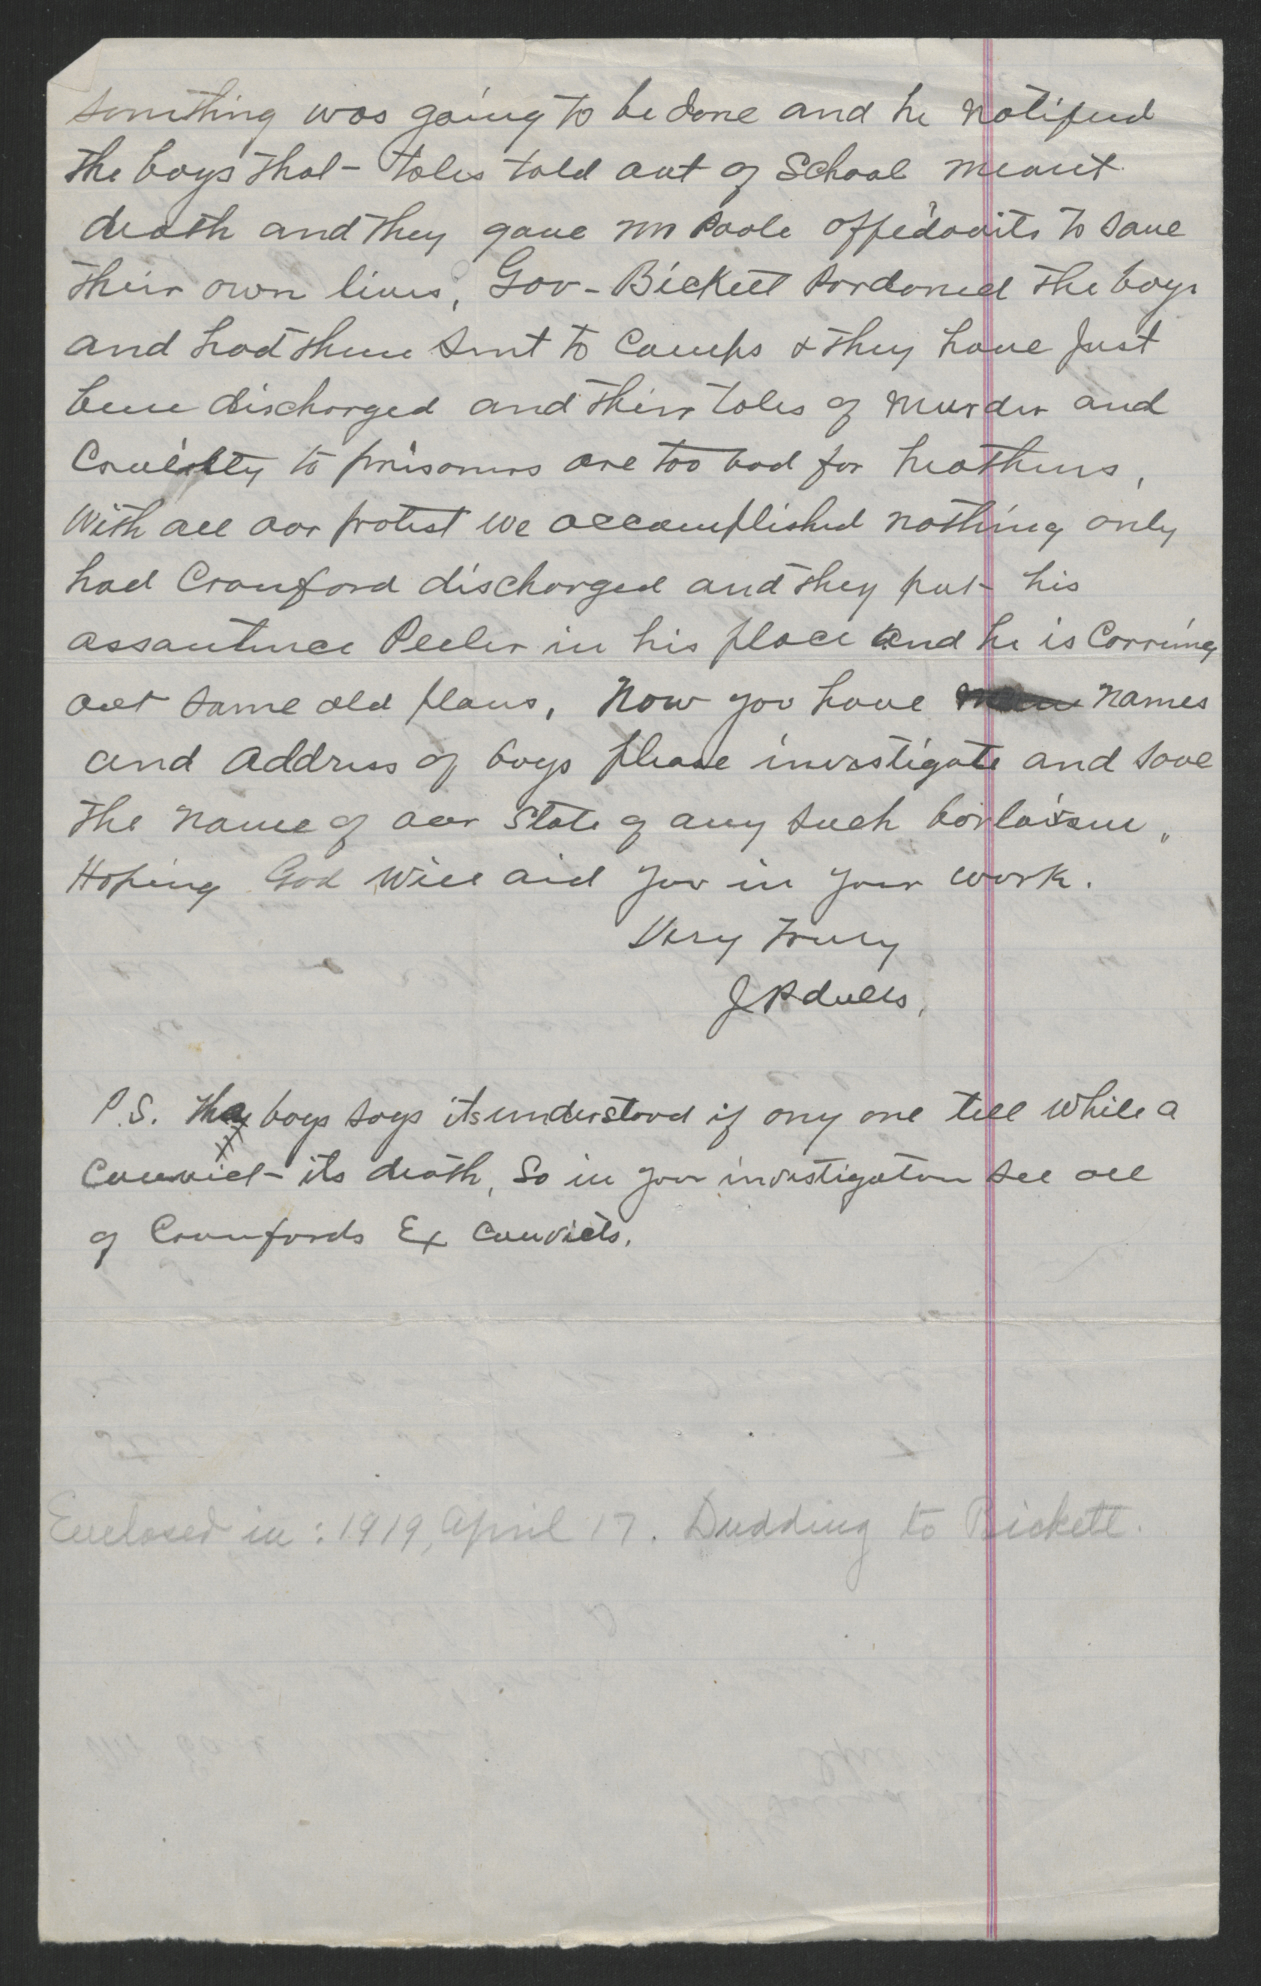 Letter from Dulls to Dudding, April 14, 1919, page 2